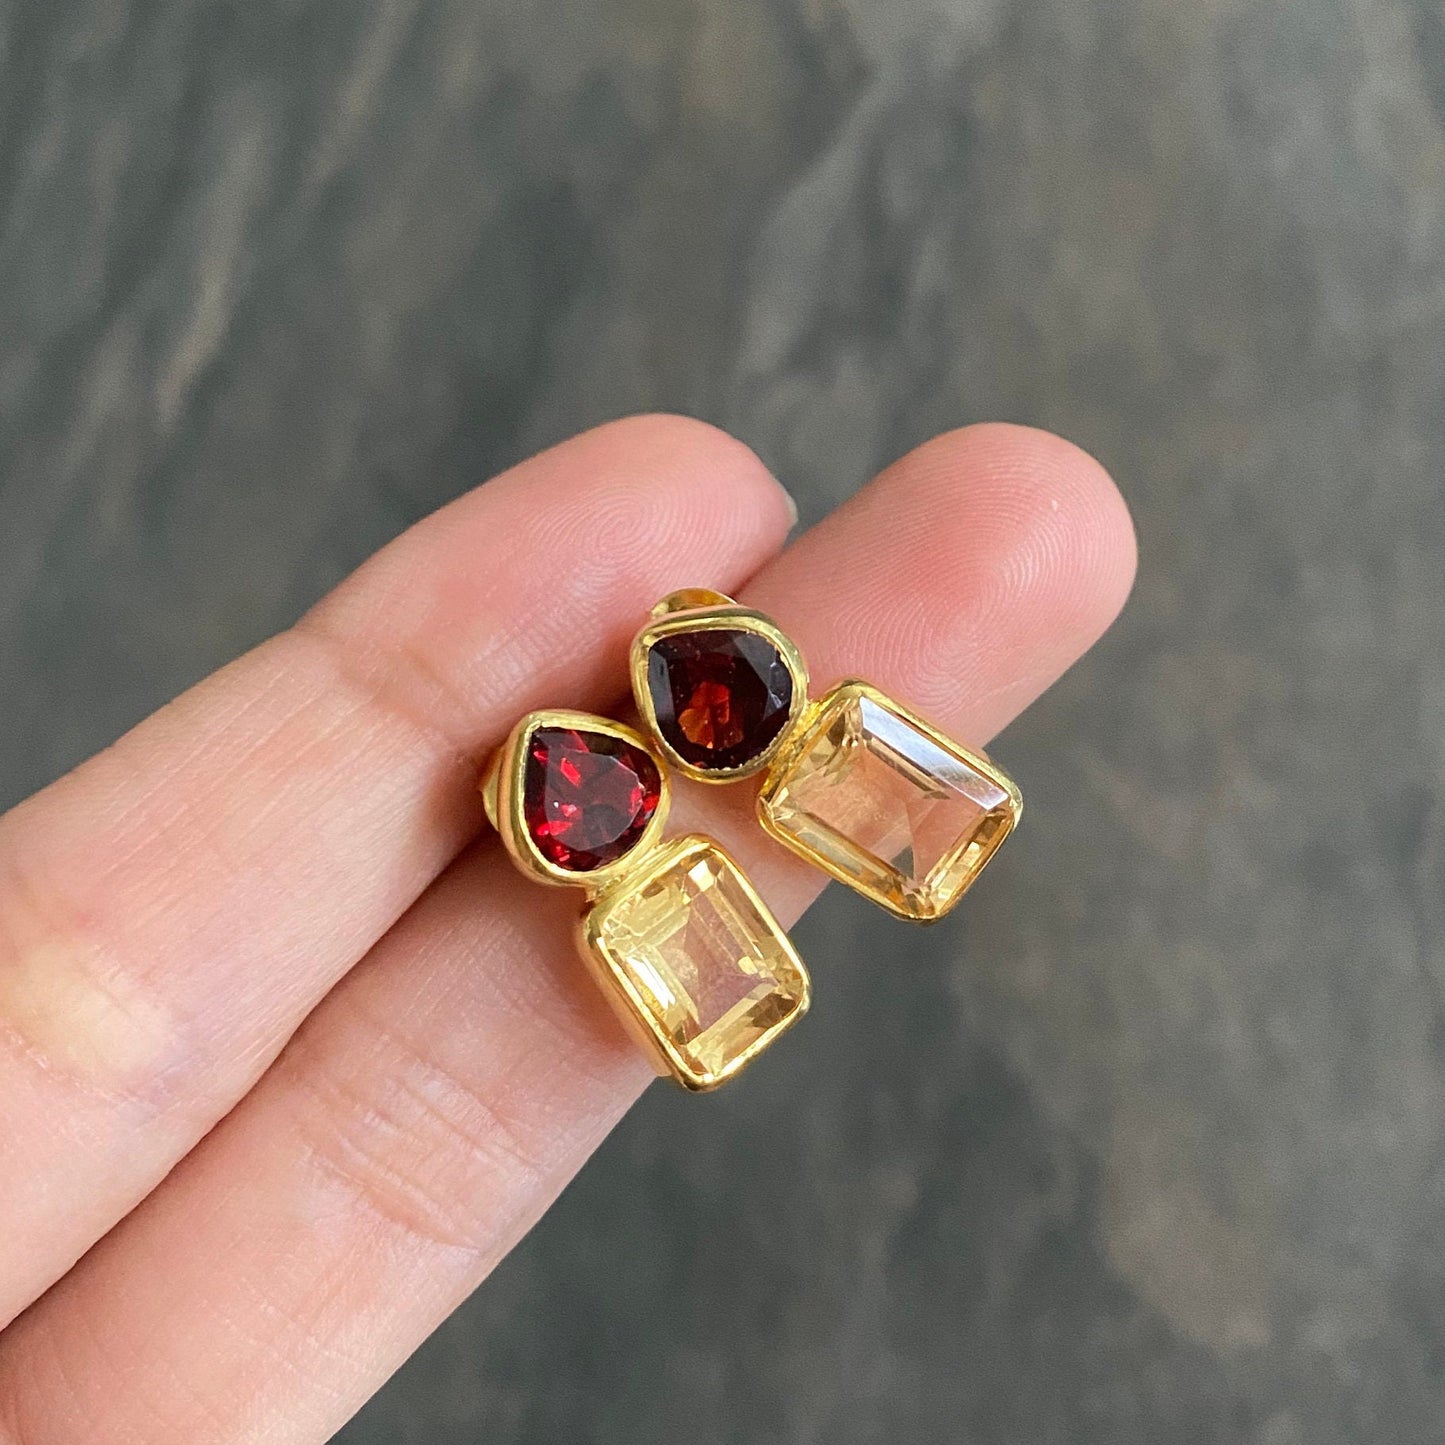 Garnet Citrine Gold Stud Earrings, Unique Gold Plated Sterling Silver Earrings, January, November Birthstone, Birthday Gifts For Her